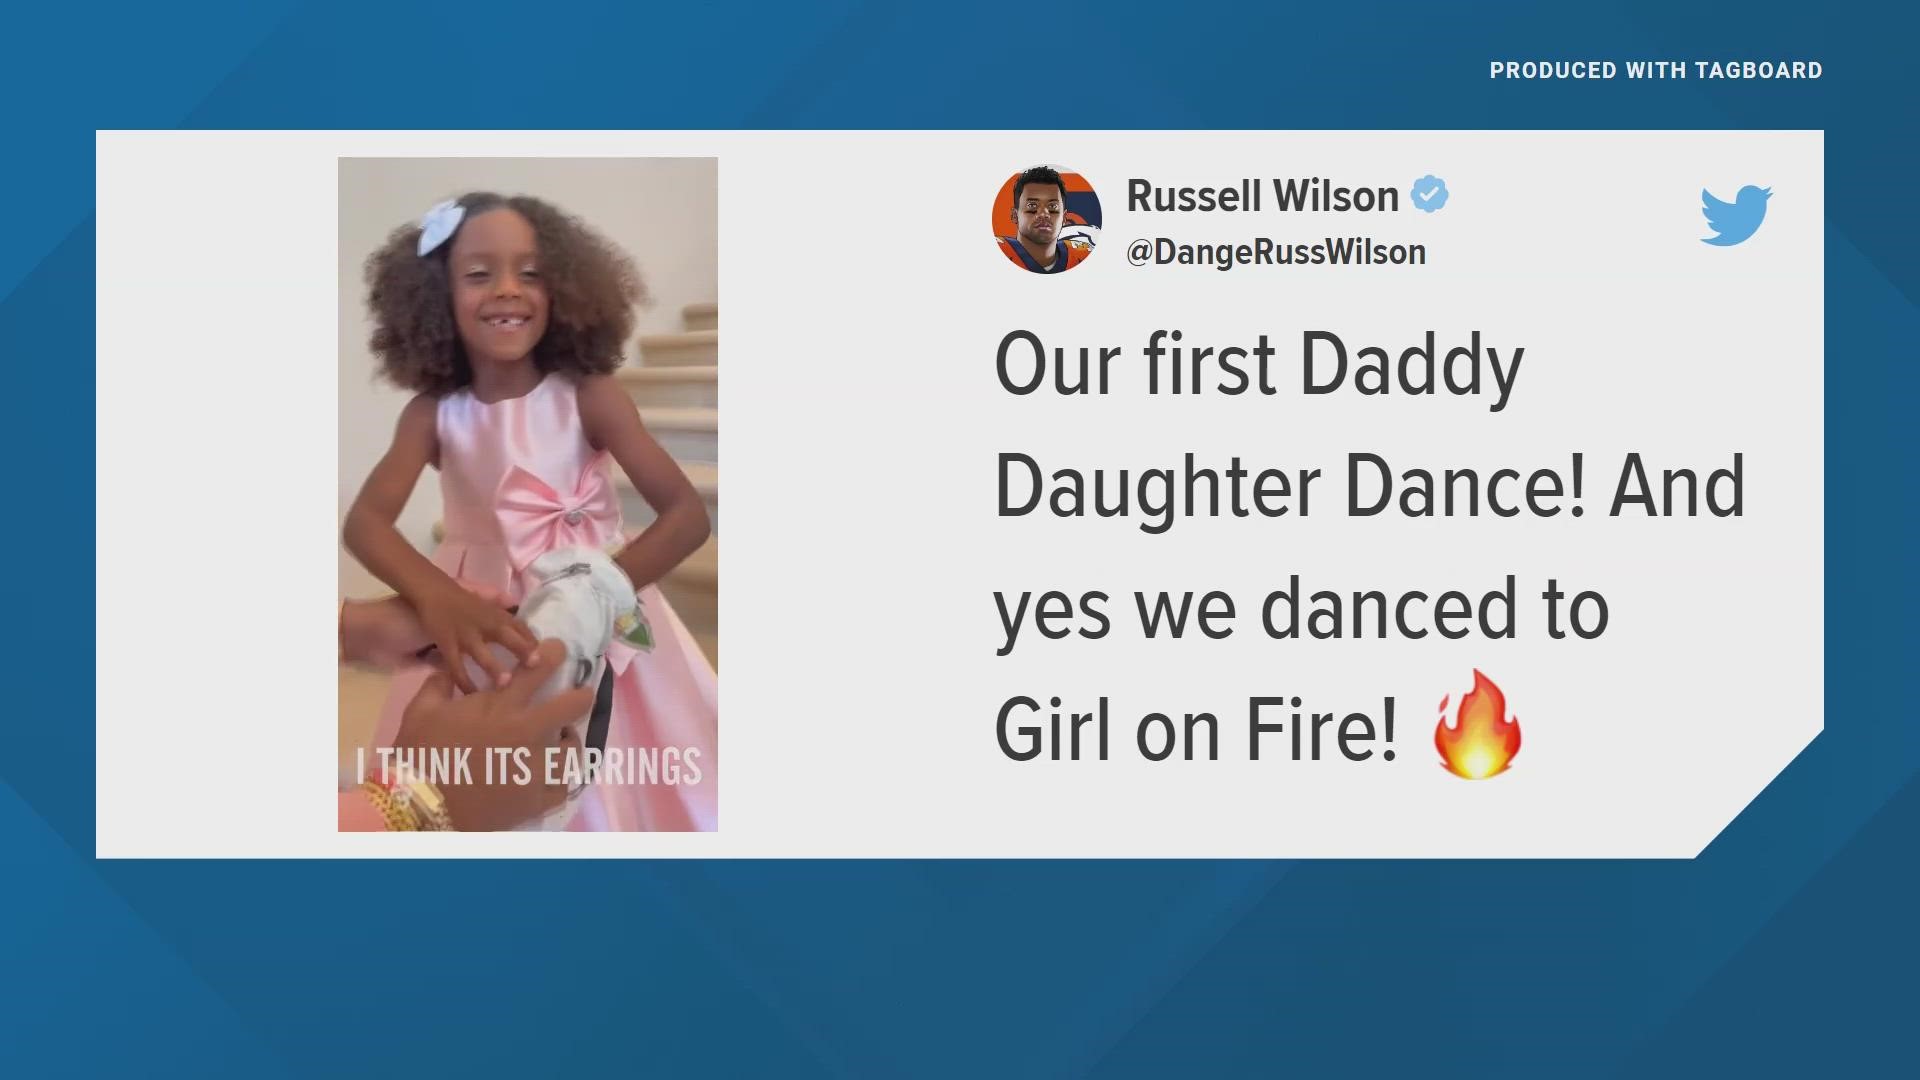 The Broncos QB took his daughter to their first daddy-daughter dance. He said they danced to "Girl on Fire."